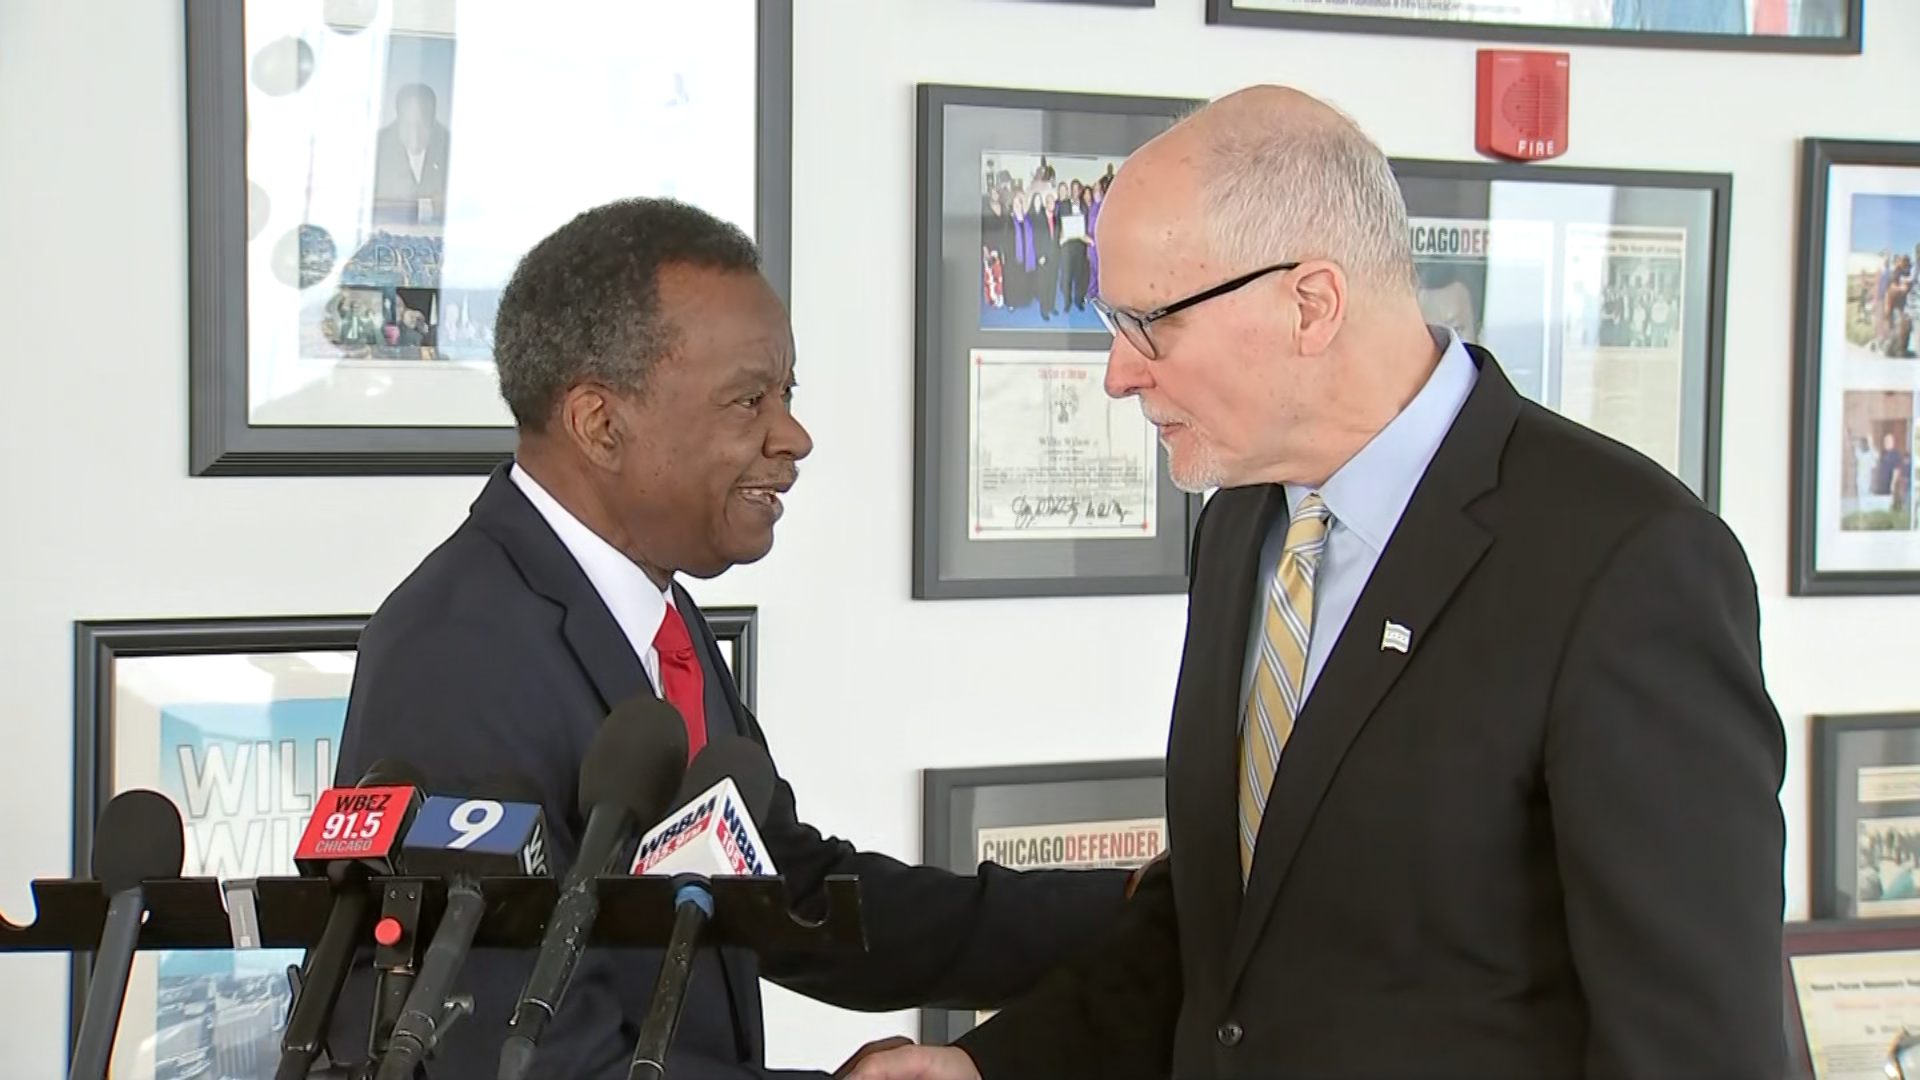 Willie Wilson Endorses Paul Vallas, Citing Concerns Over Tax